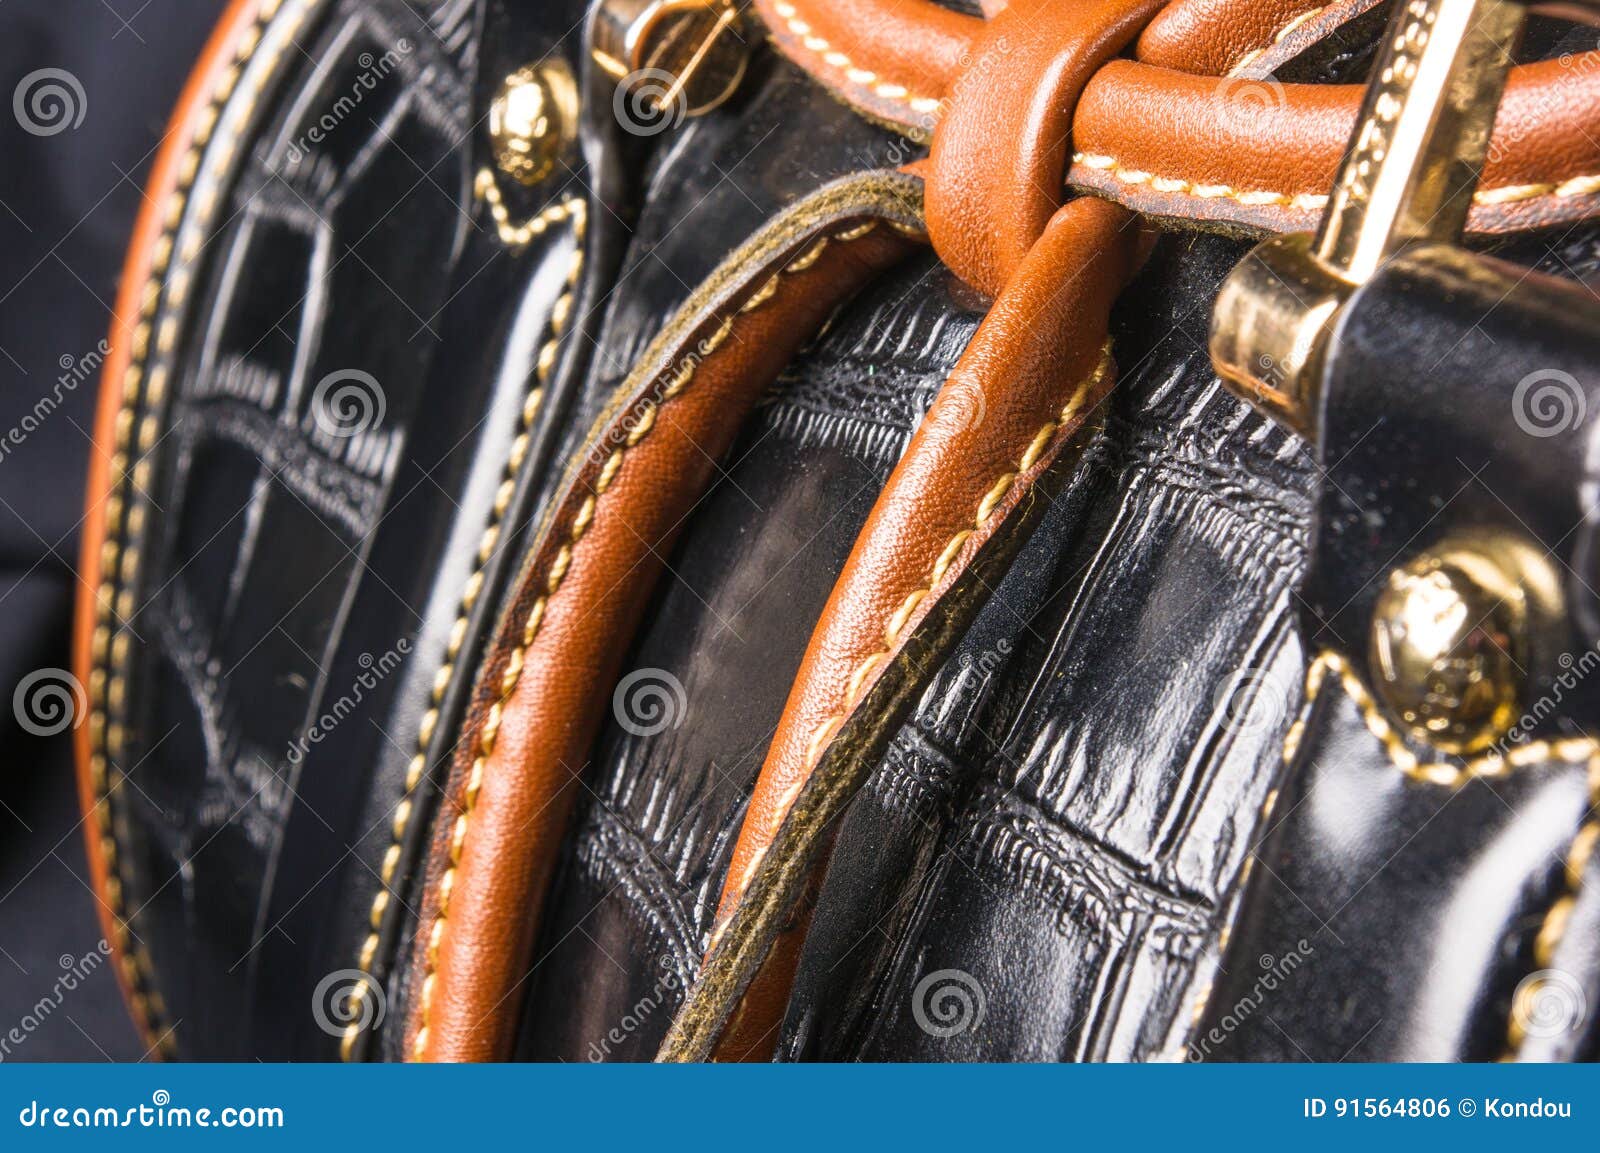 Seams on leather hand bag stock photo. Image of beauty - 91564806